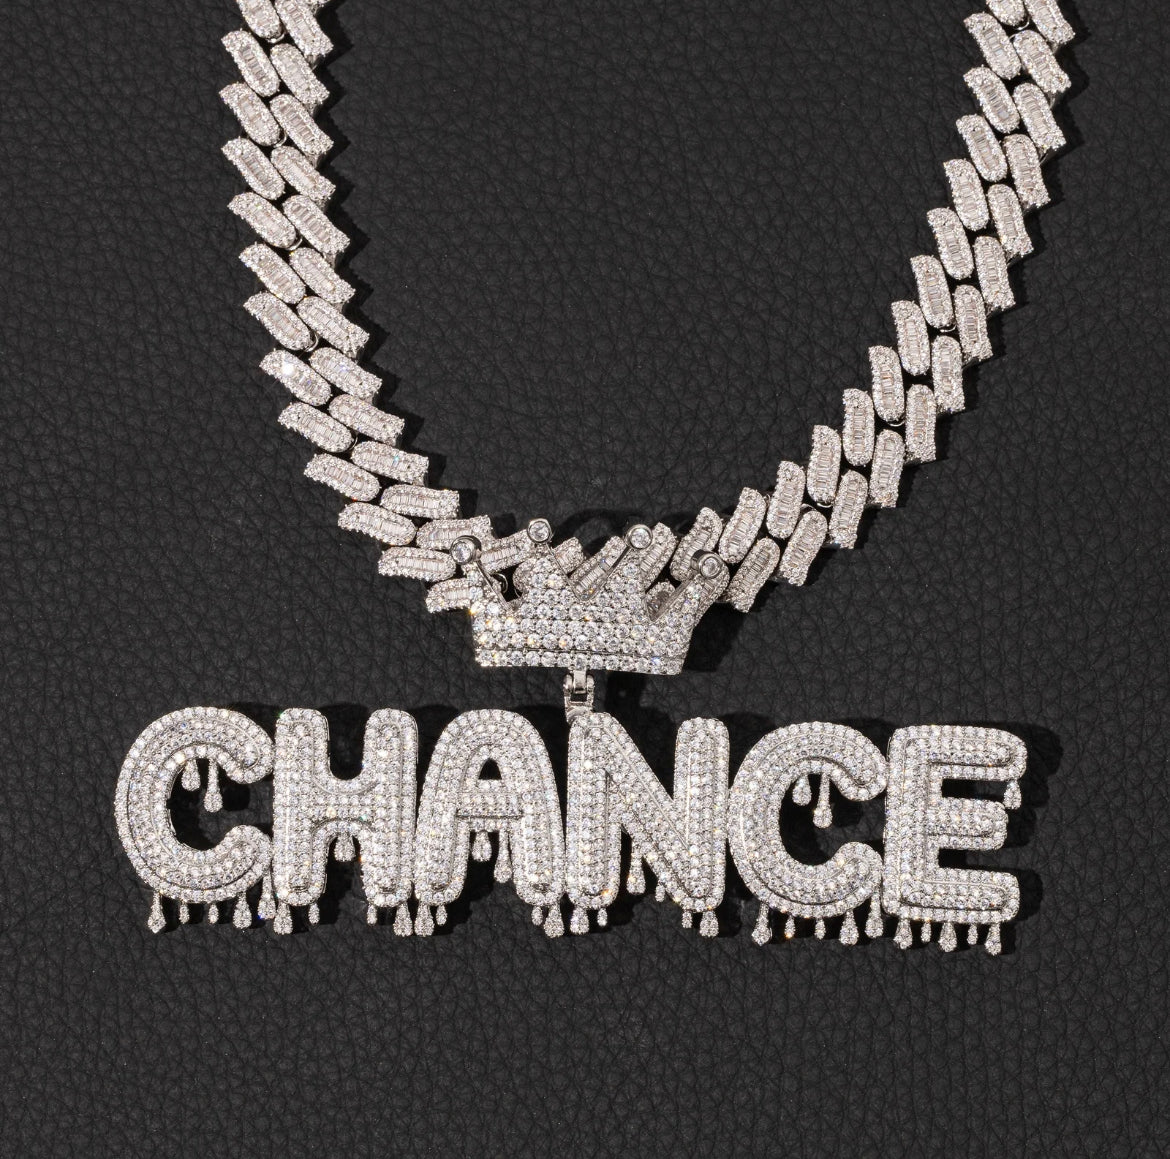 Dripped Crowned Cuban Name Necklace